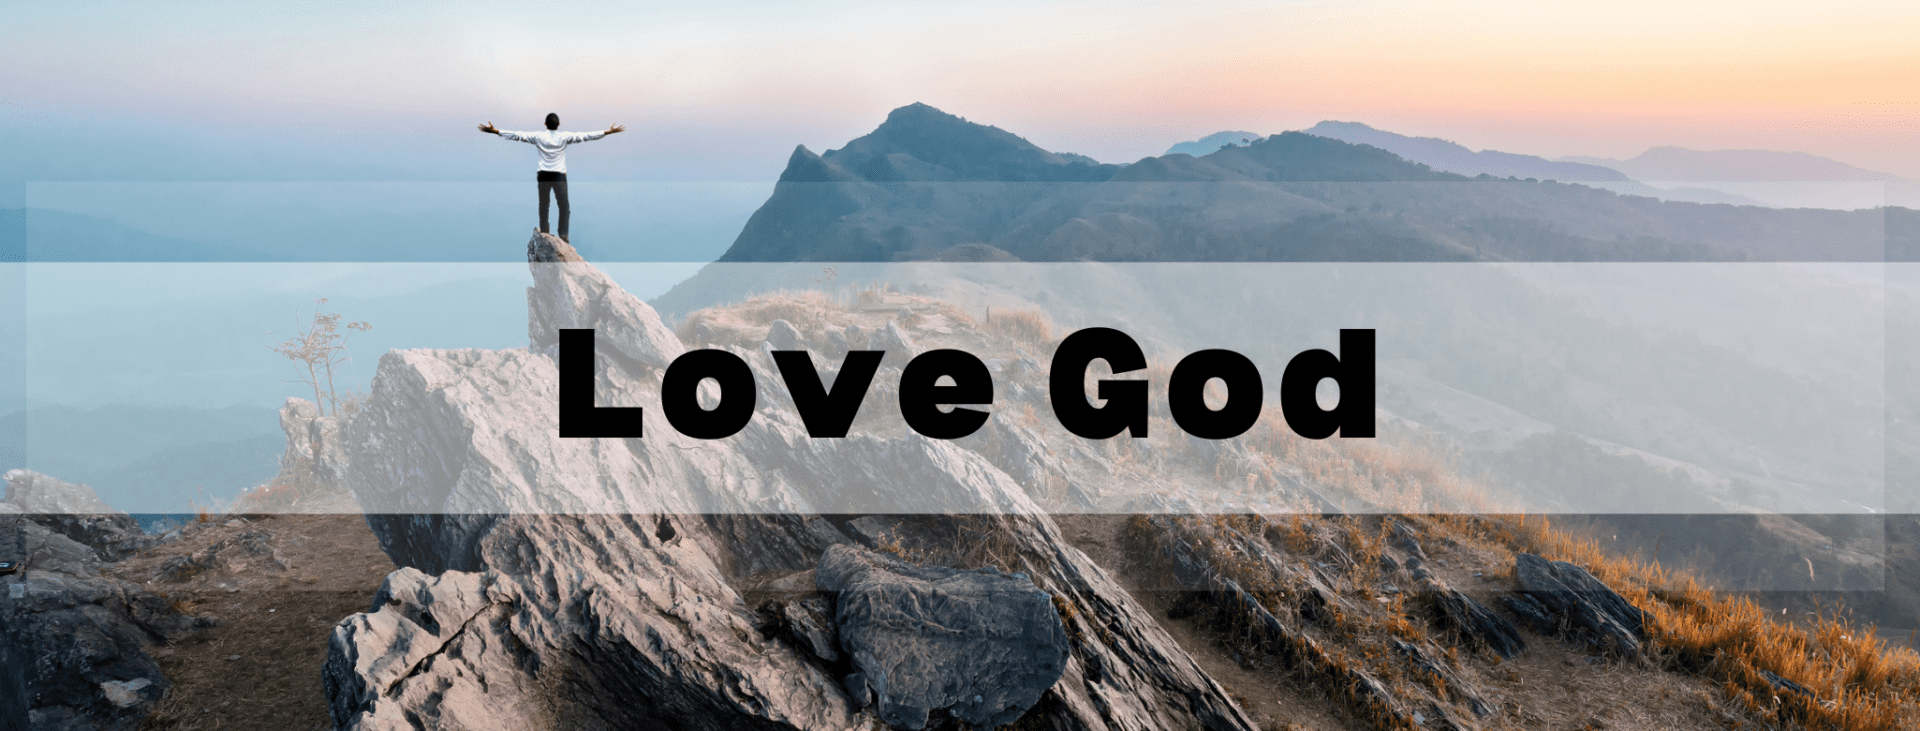 Love God header man standing on mountain with arms out